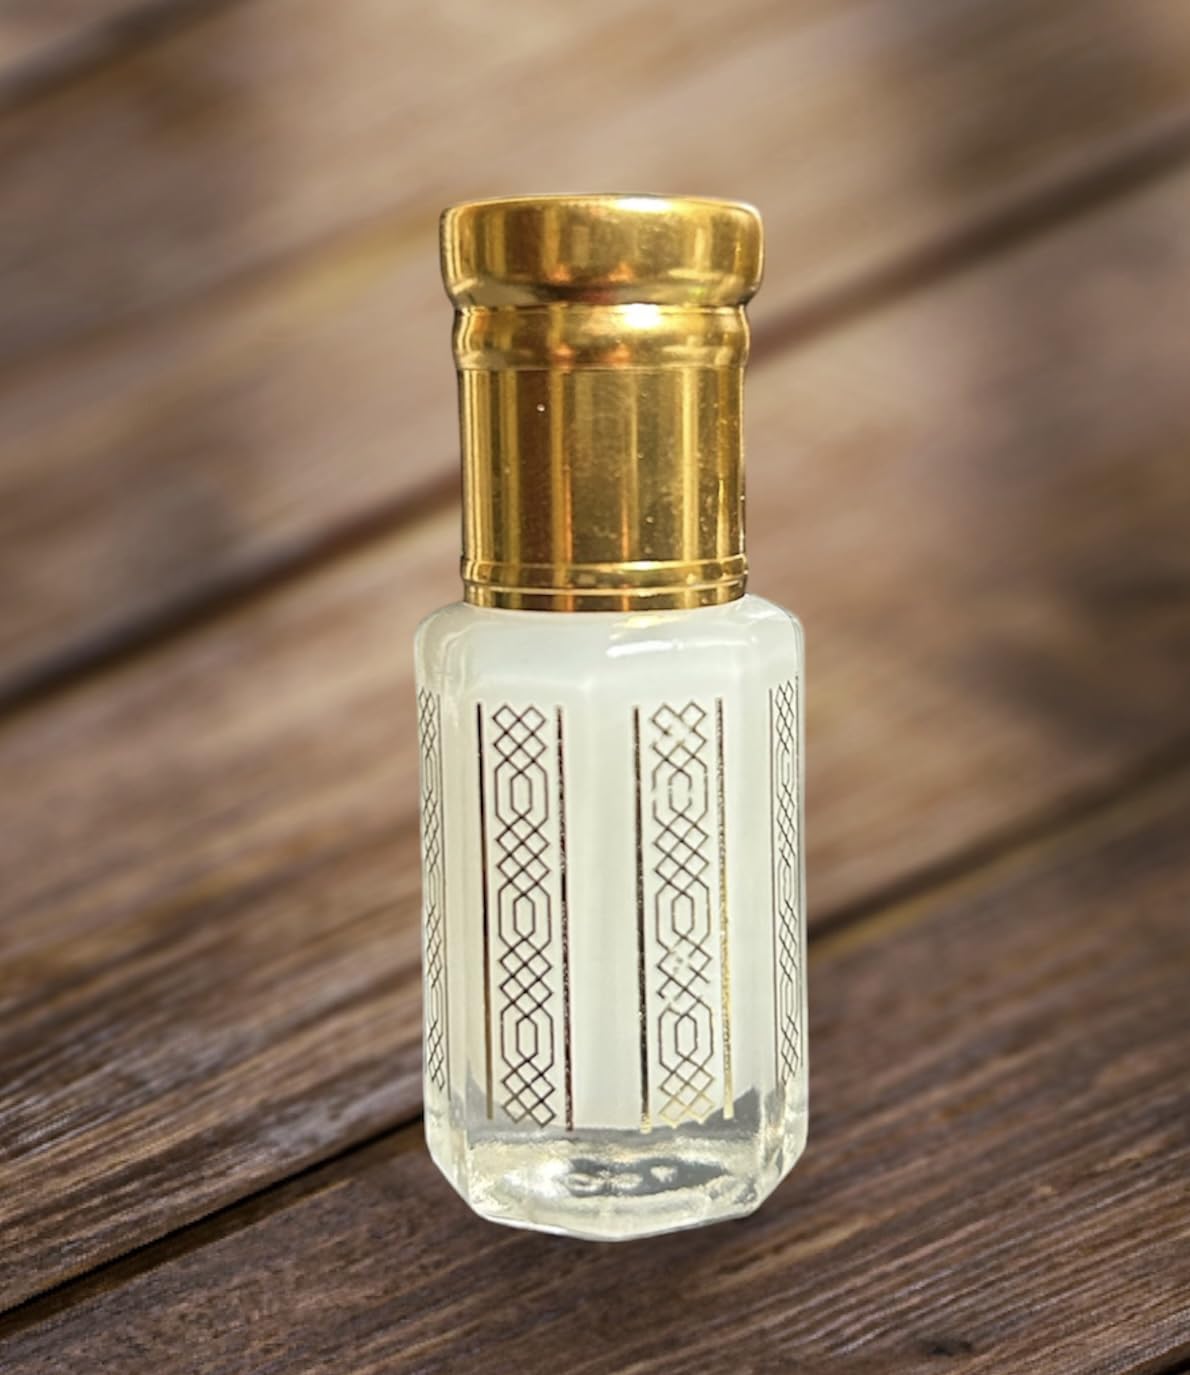 MUSK ALTAHARA White 6ml | Artisanal Hand Crafted Perfume Oil Fragrance for Women and for Men | Incense Scented Body Fragrance | Pure Perfume Alcohol Free